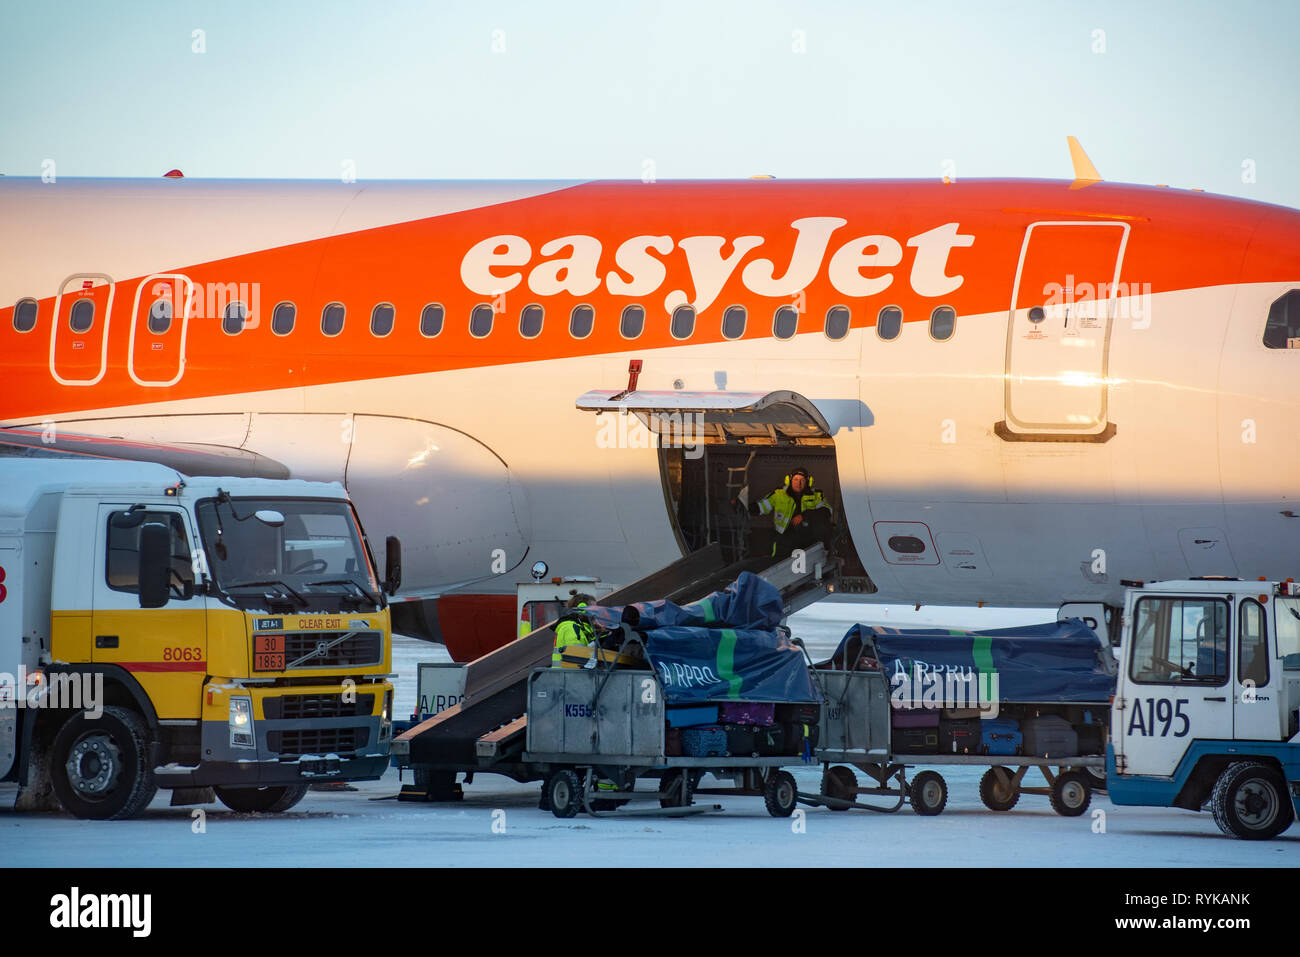 Airport workers removing the luggage bags from an easyJet aeroplane, Kittila airport sign, Kitilla, Finland. Stock Photo